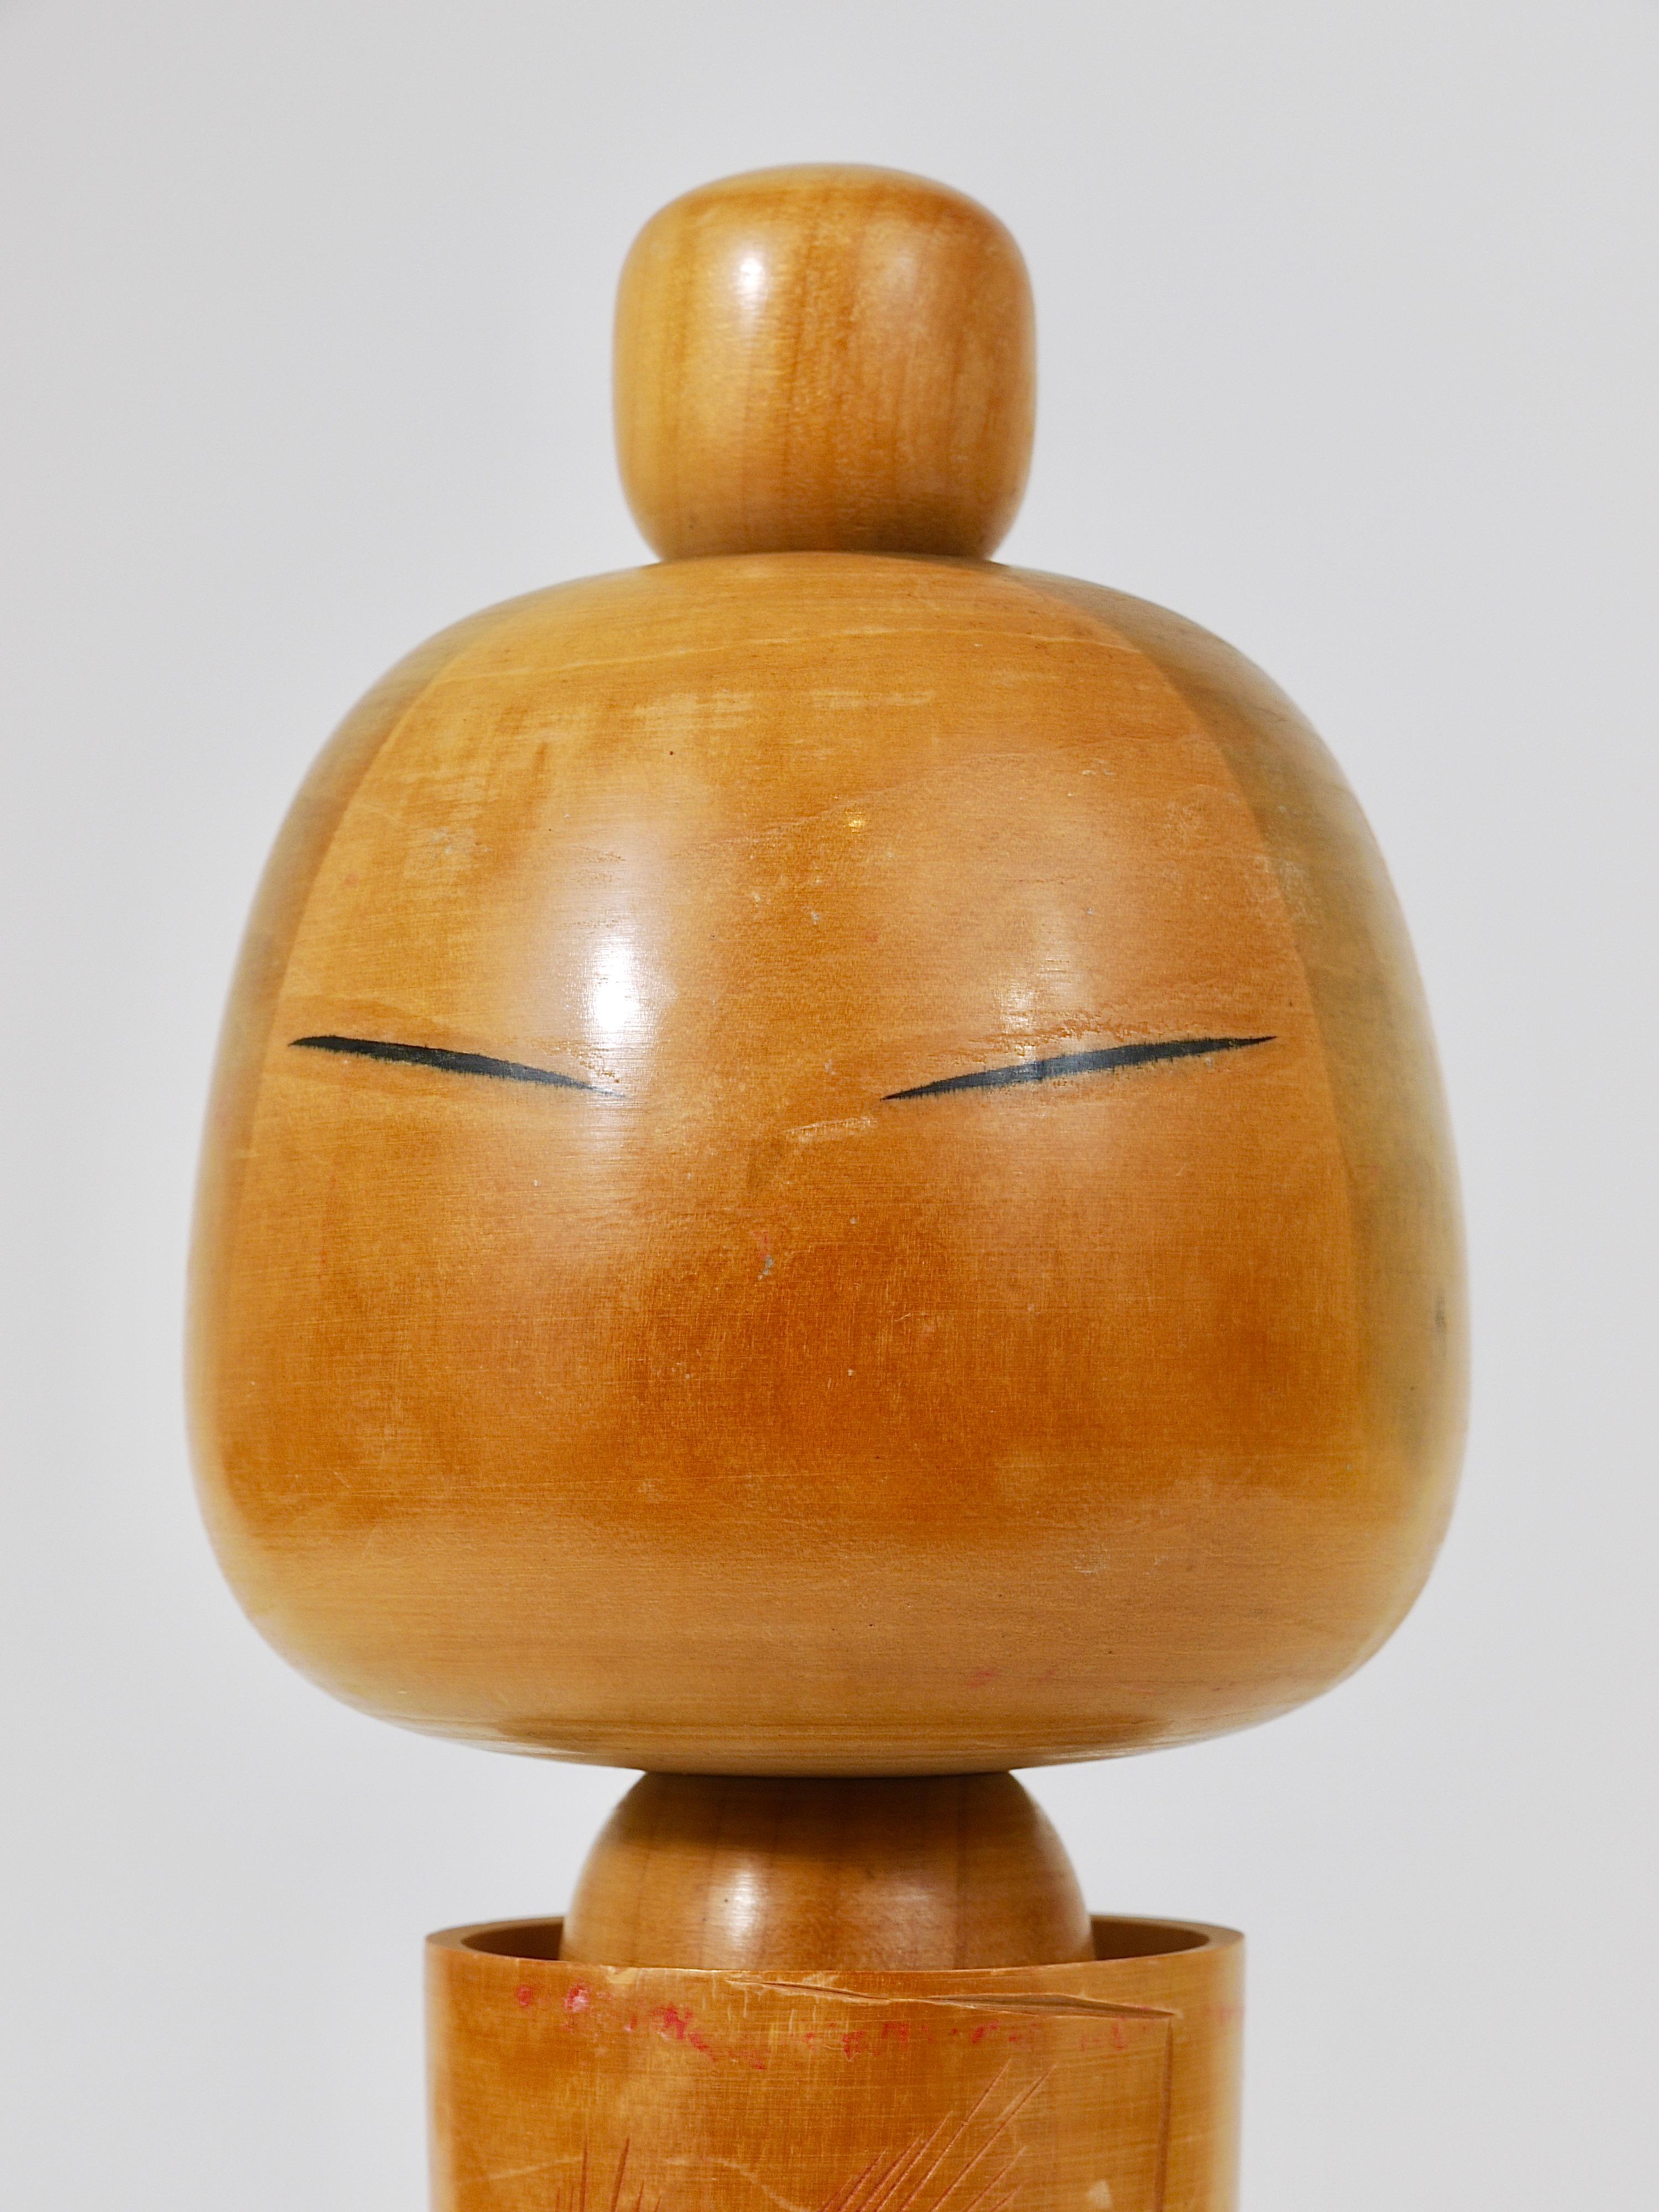 20th Century Decorative Sadao Kishi Kokeshi Doll Sculpture from Japan, Hand-Painted For Sale